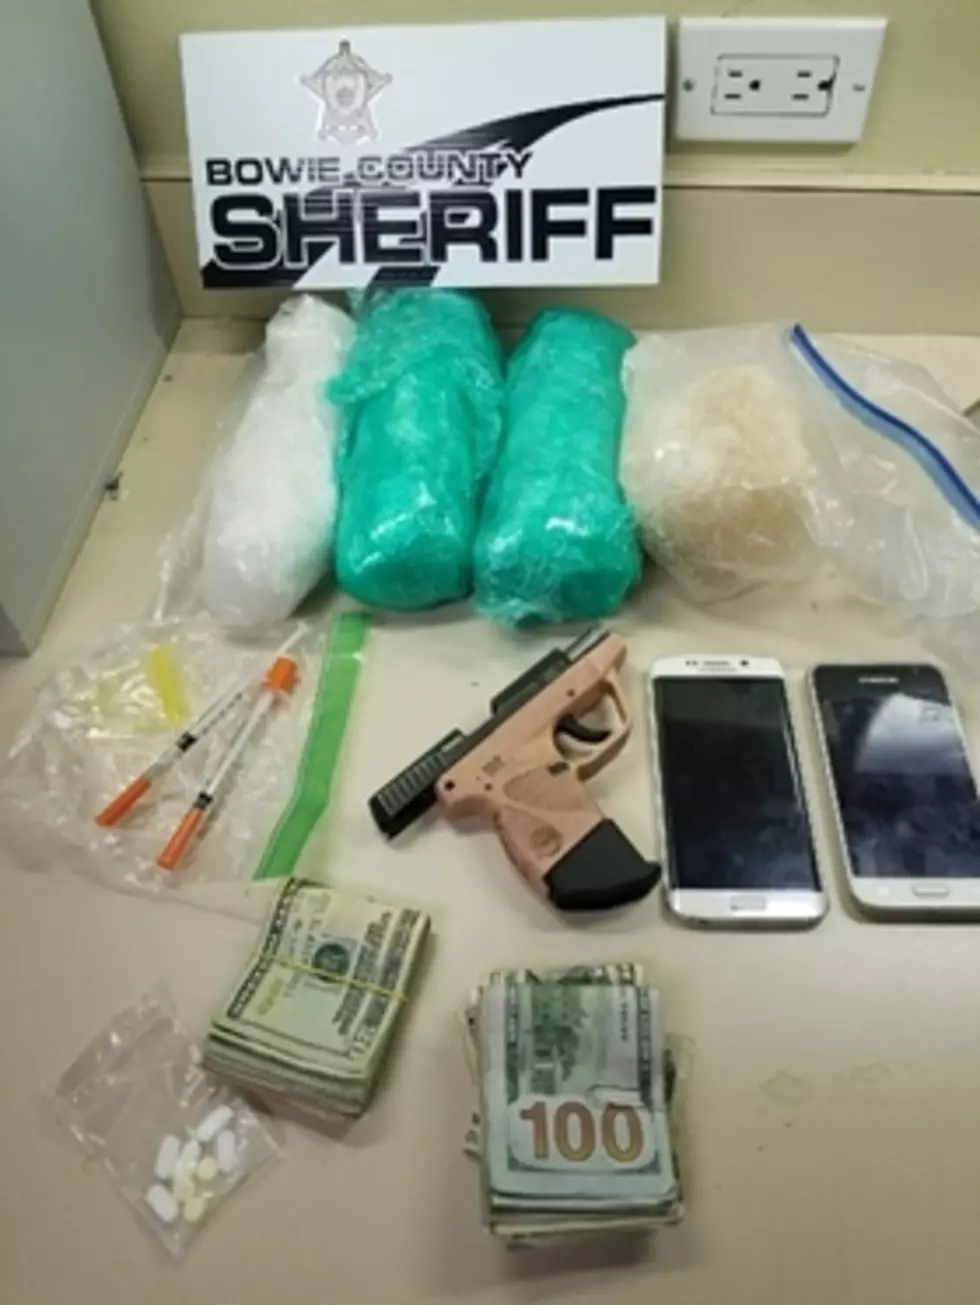 Bowie County Makes Drug Haul